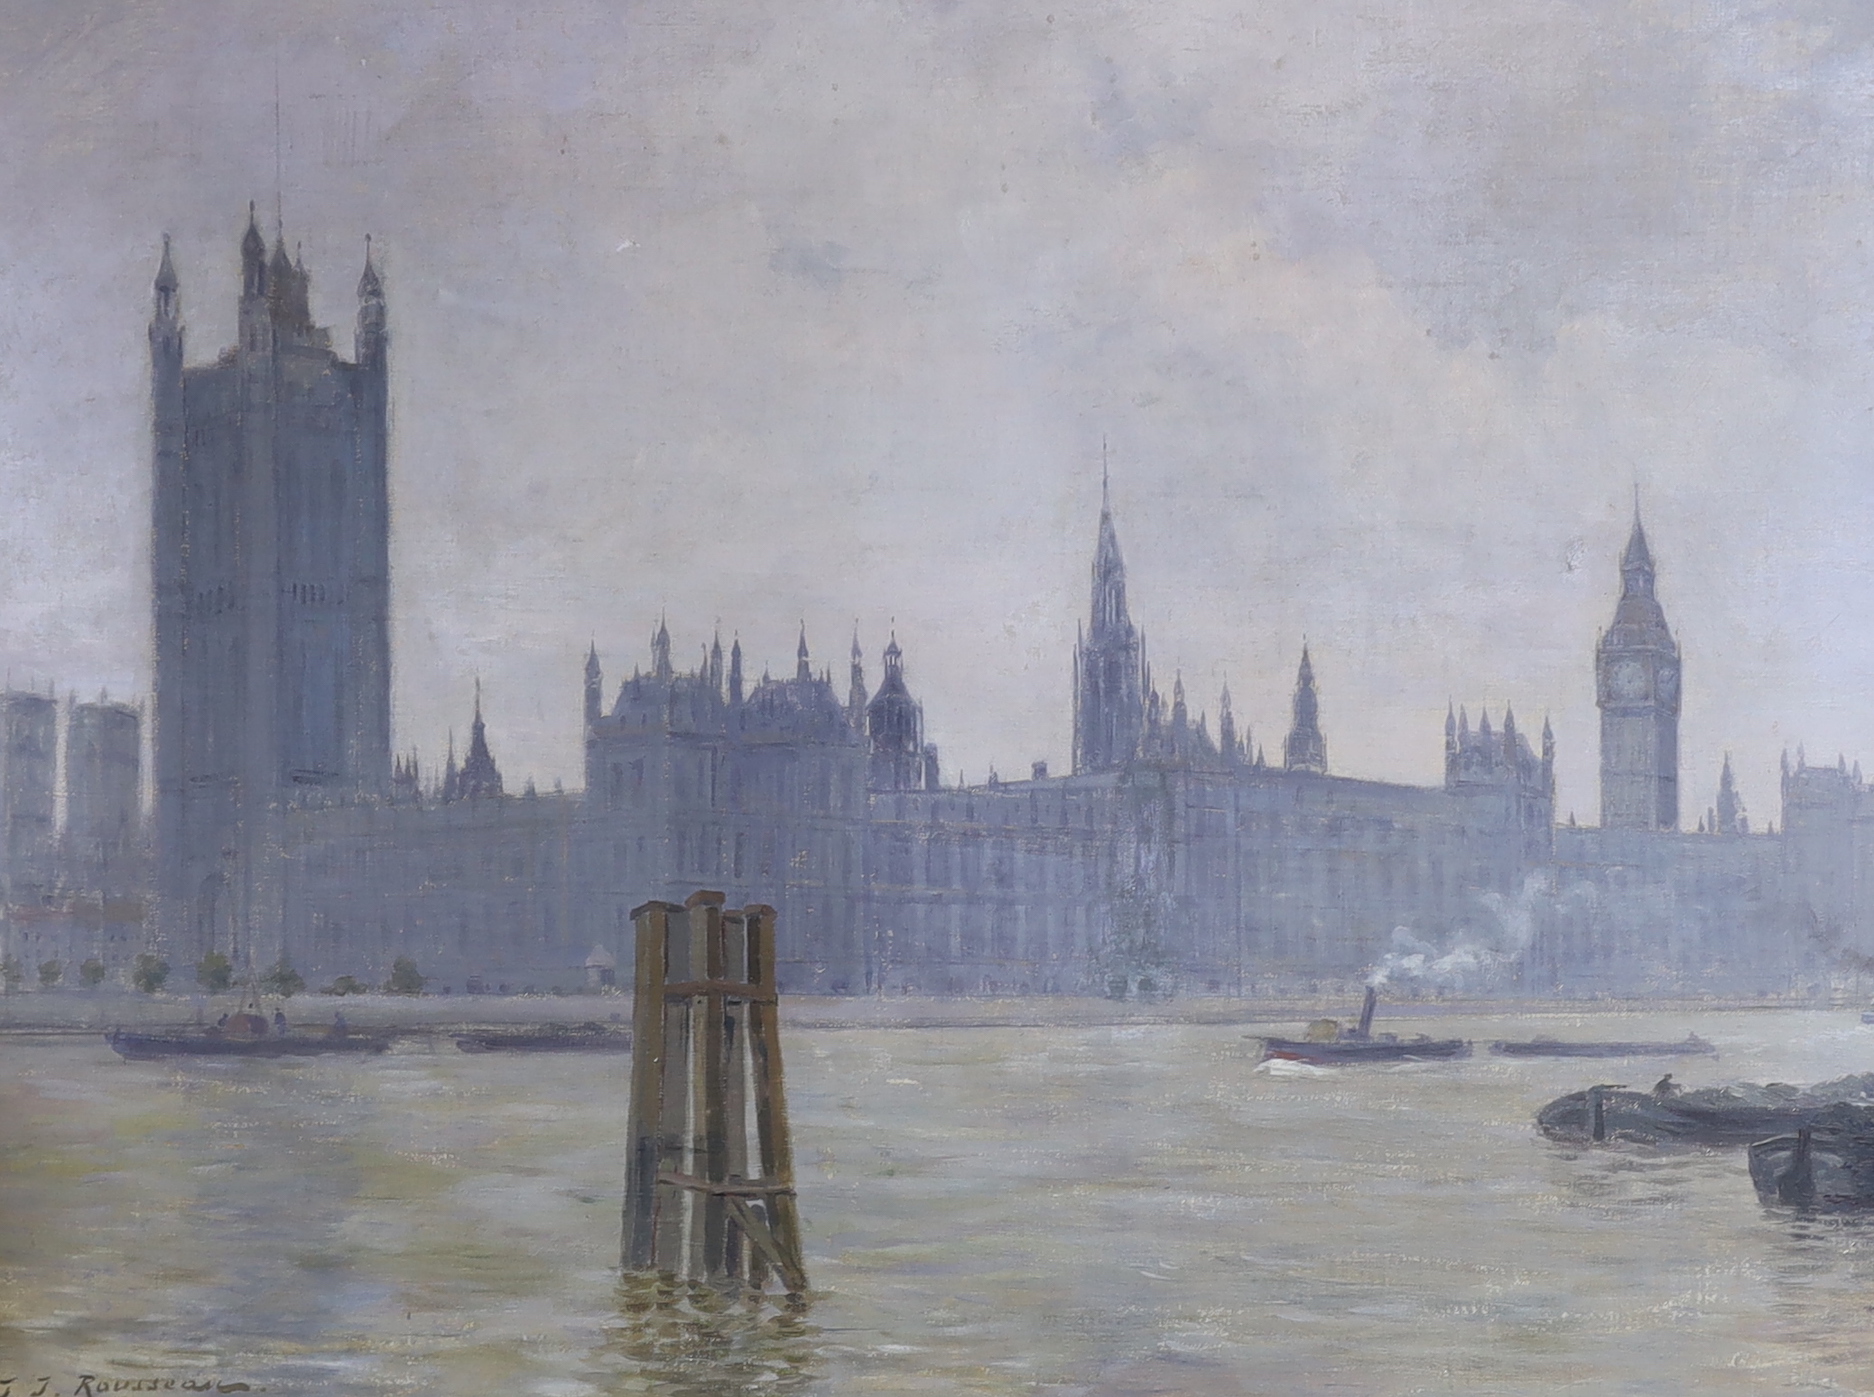 Jean-Jacques Rousseau (French, 1861-1911), oil on canvas, ‘Londres 1891’, The Houses of Parliament from The Thames, signed and dated lower left 1891, 44 x 59cm, applied plaque to the frame